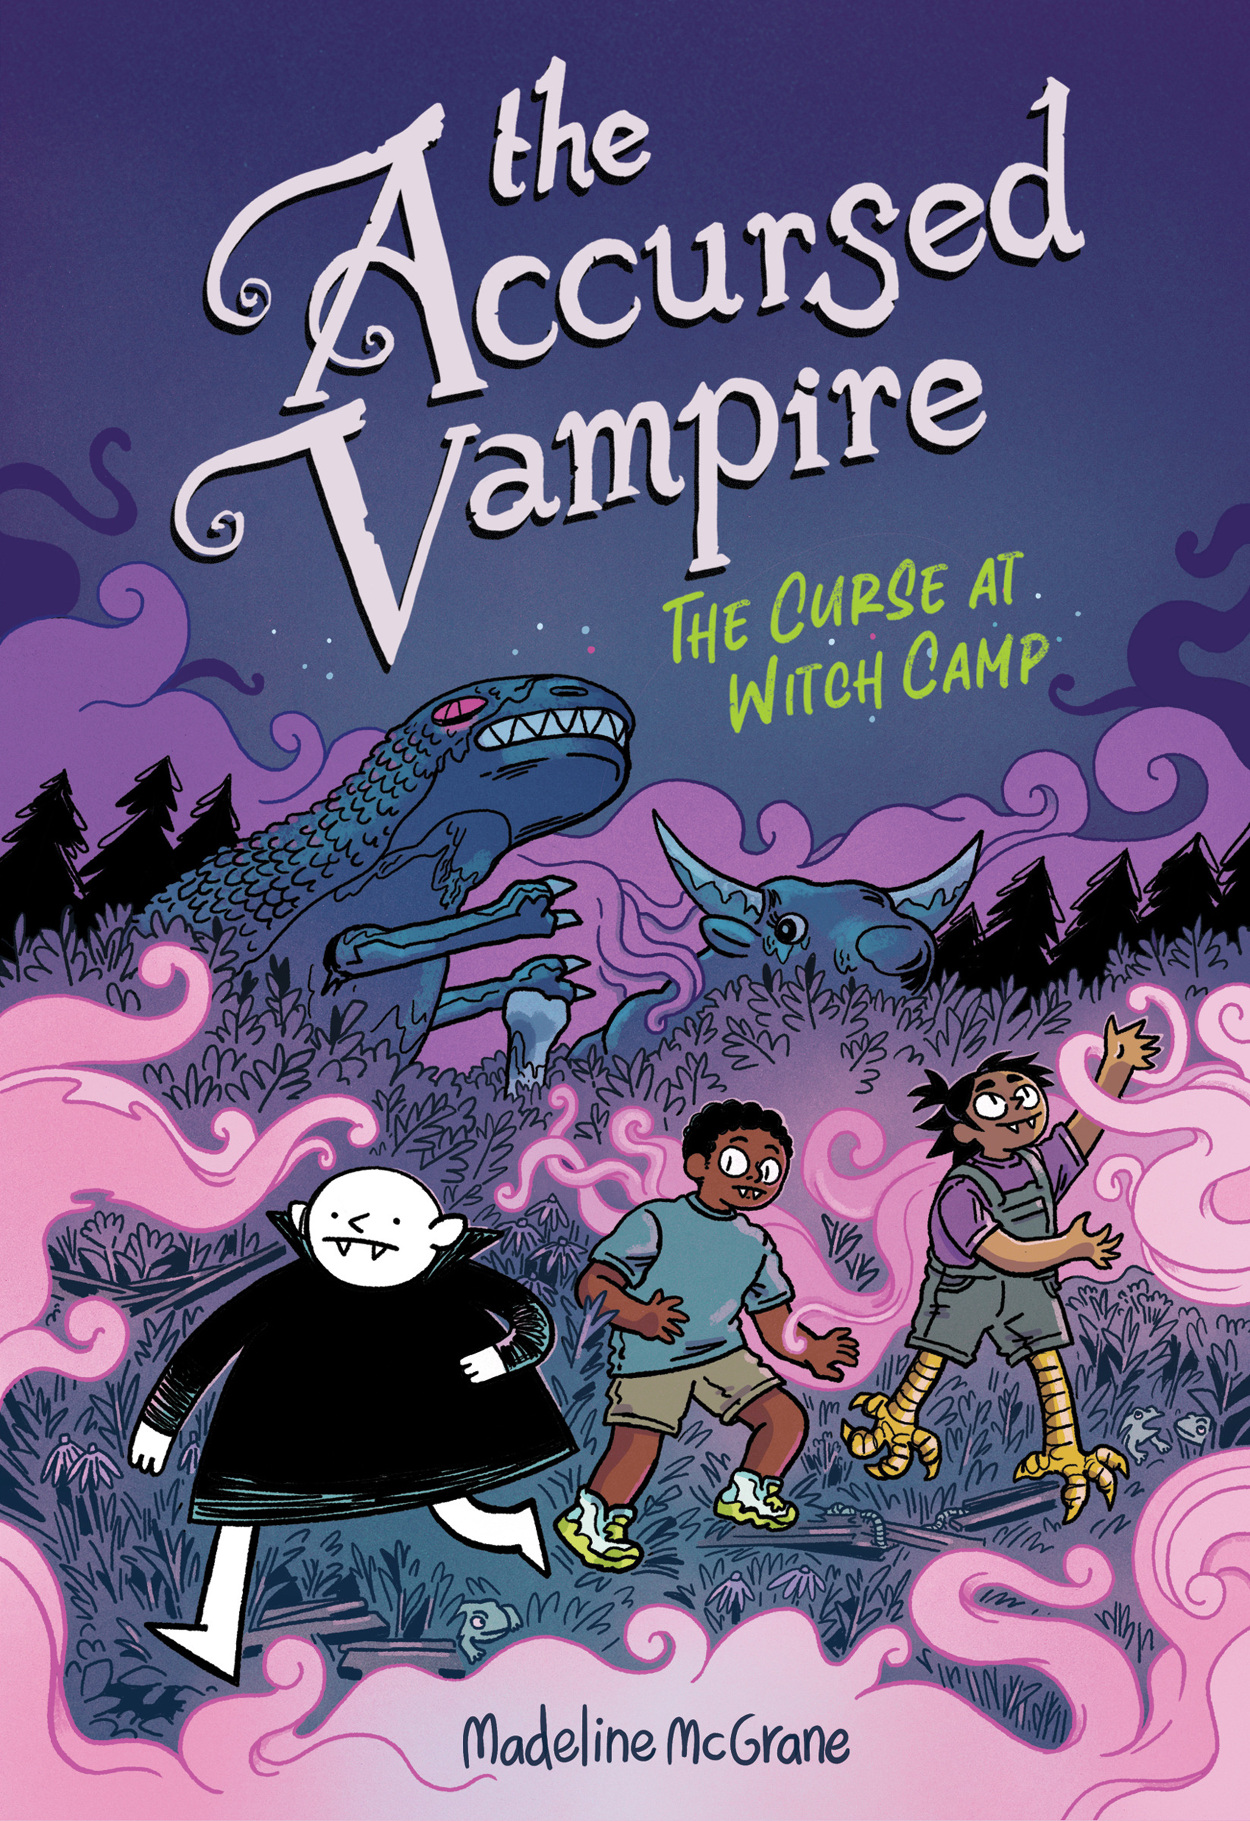 Cover image of "The Accursed Vampire: The Curse at Witch Camp," featuring three white-fanged vampire children in a grassy field at night time. The field is tinged purple with plumes of pink smoke creeping across, and off in the distance are an animatronic dinosaur and bull (two structures left behind in an abandoned mini-golf course). The first vampire child, Dragoslava, has completely pale white skin and is wearing a black cape. The second vampire child, Quintus, is Black and wearing a tshirt, shorts, and sneakers. The third vampire child, Eztli, has brown skin, spikey black hair and taloned bird feet for legs, and is wearing a tshirt and shorteralls. 